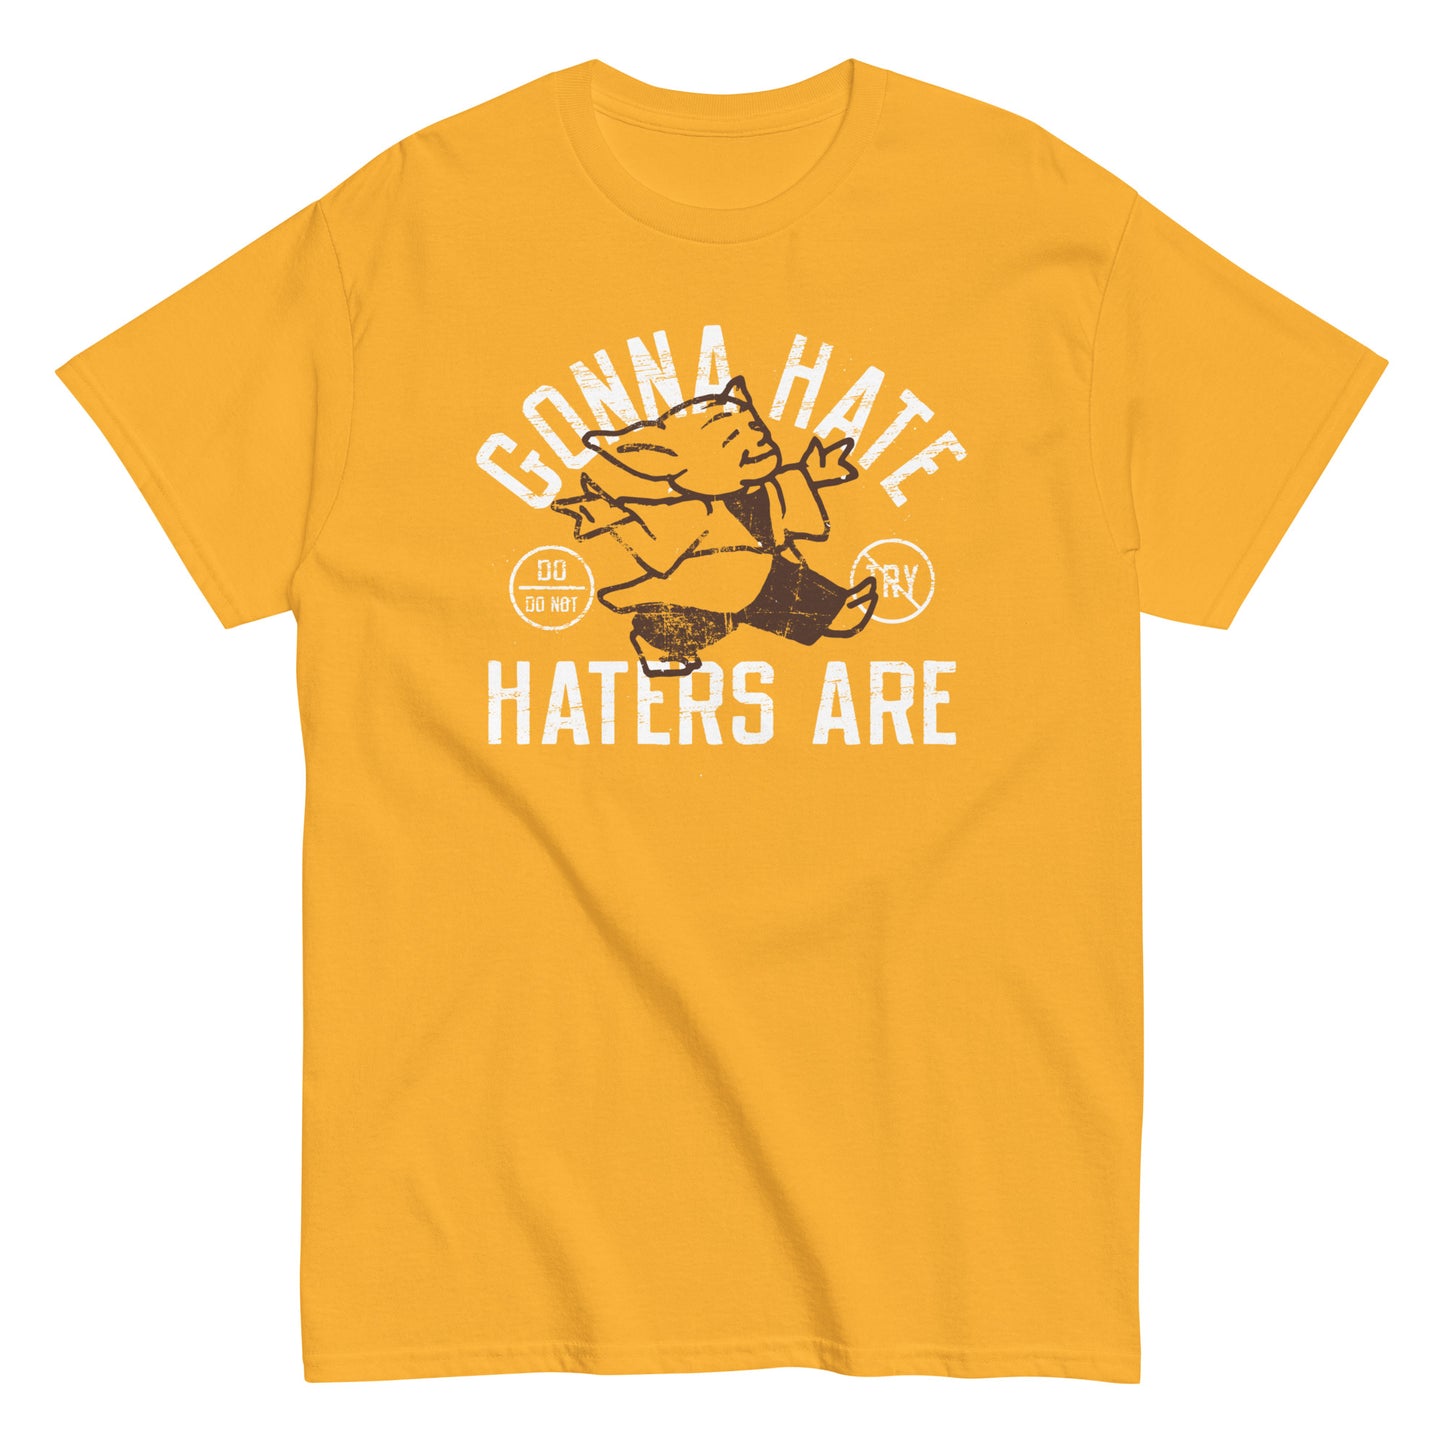 Gonna Hate Haters Are Men's Classic Tee